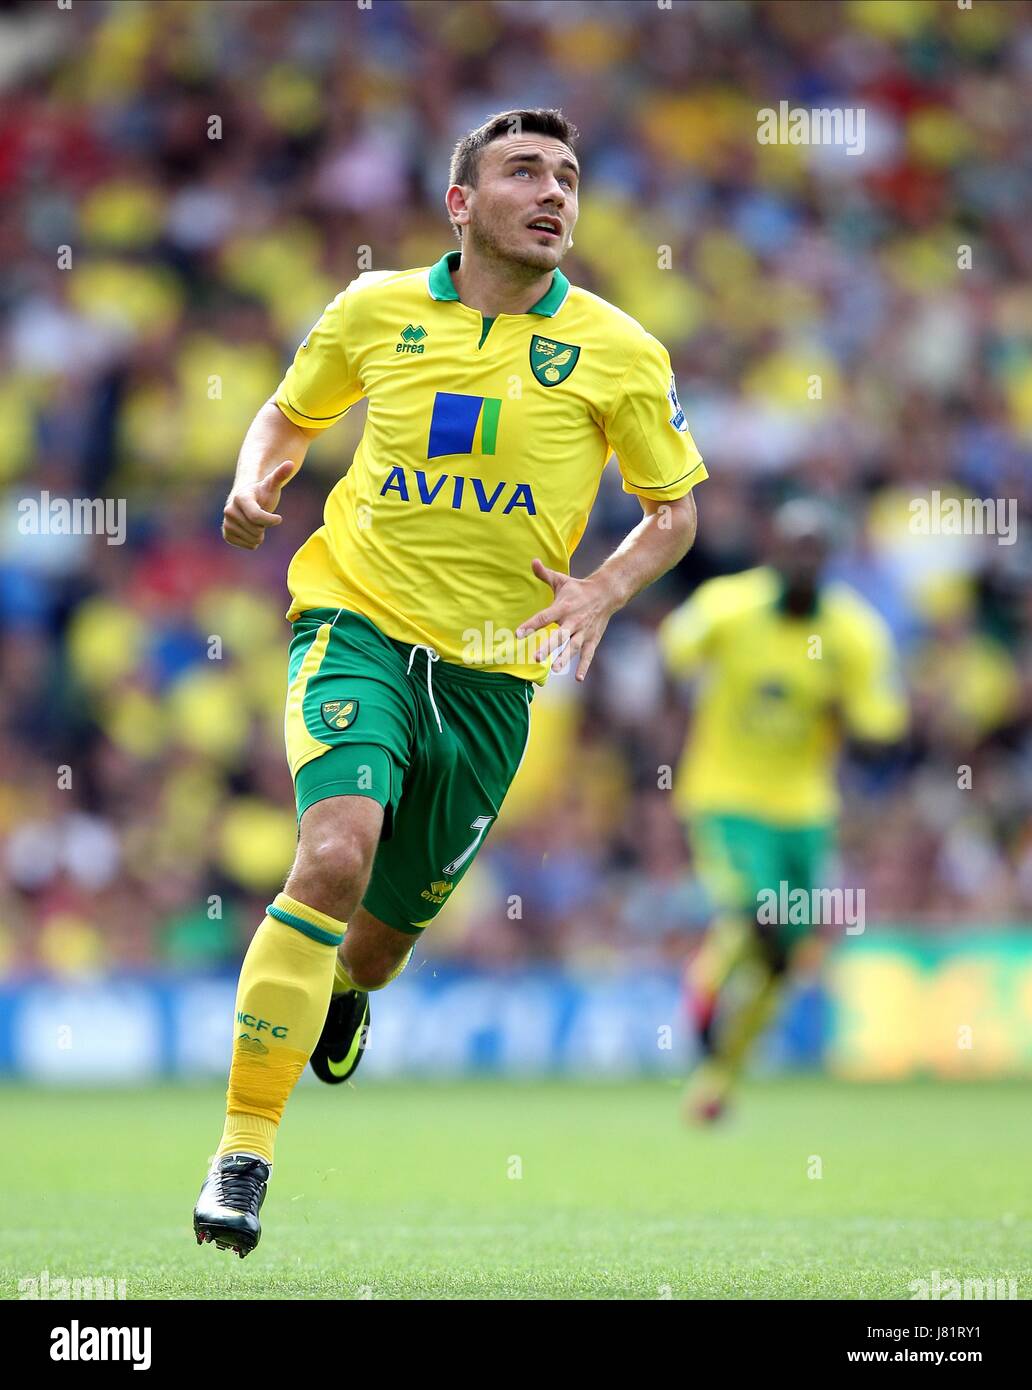 ROBERT SNODGRASS NORWICH CITY FC NORWICH CITY V QPR BARCLAYS PREMIER LEAGUE CARROW ROAD, NORWICH, ENGLAND 25 August 2012 GAO57035     WARNING! This Photograph May Only Be Used For Newspaper And/Or Magazine Editorial Purposes. May Not Be Used For Publications Involving 1 player, 1 Club Or 1 Competition  Without Written Authorisation From Football DataCo Ltd. For Any Queries, Please Contact Football DataCo Ltd on +44 (0) 207 864 9121 Stock Photo